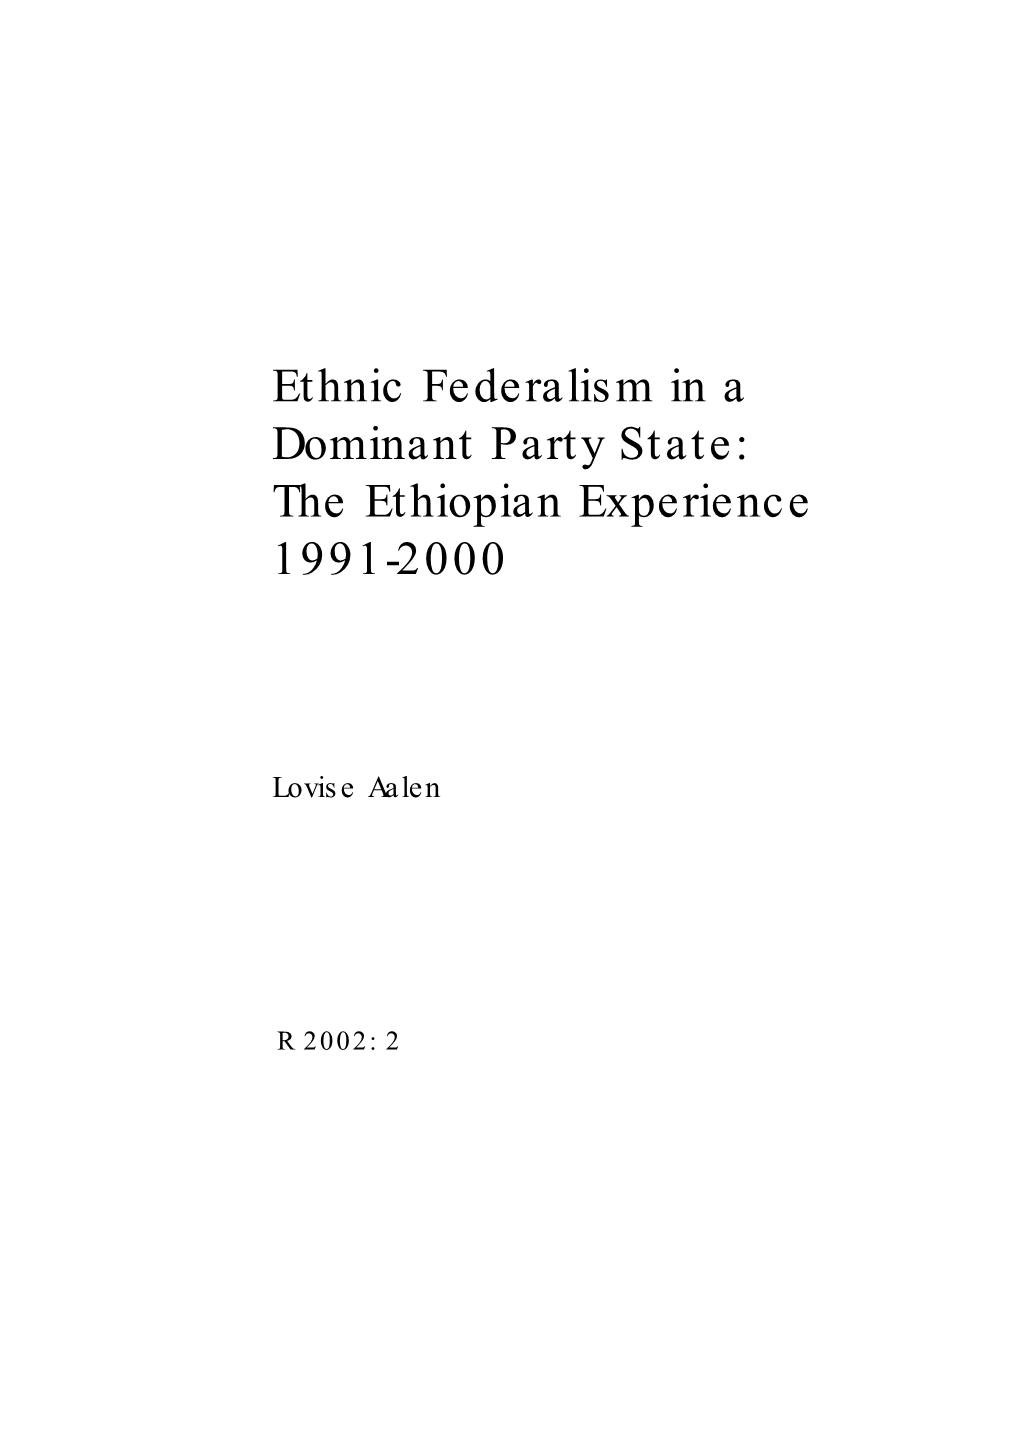 Ethnic Federalism in a Dominant Party State: the Ethiopian Experience 1991-2000